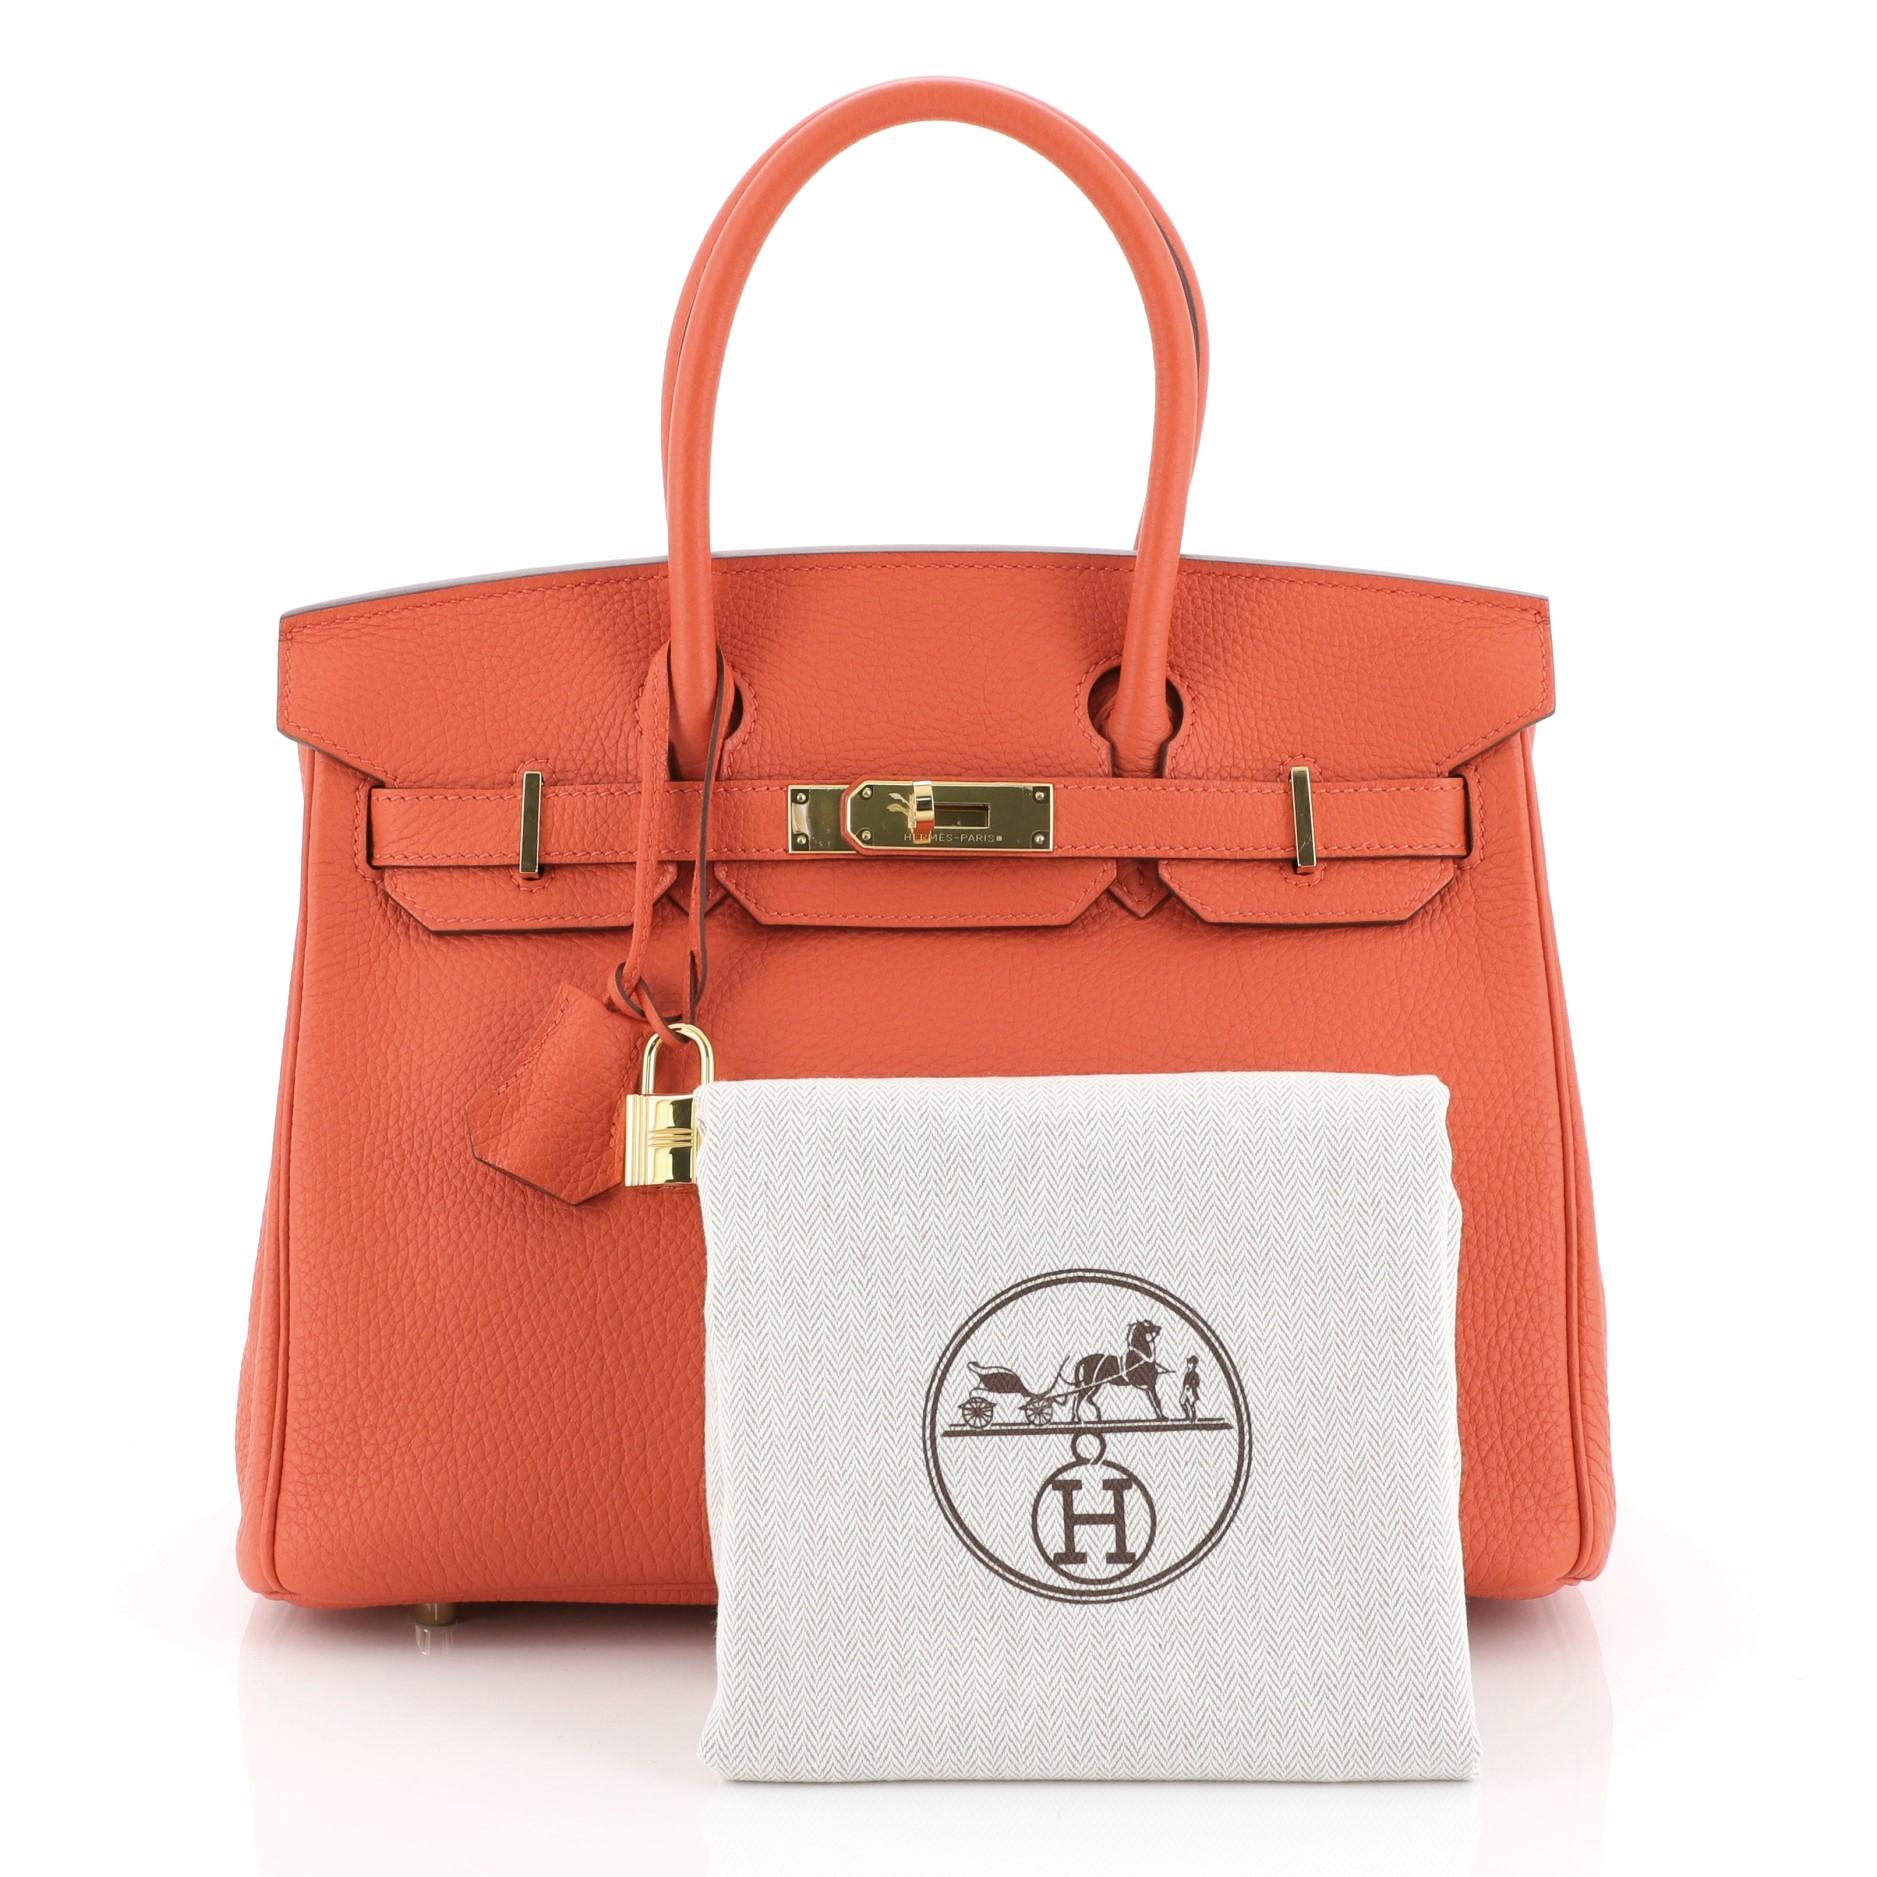 This Hermes Birkin Handbag Feu Togo with Gold Hardware 30, crafted in Feu orange Togo leather, features dual rolled handles, frontal flap, and gold hardware. Its turn-lock closure opens to a Feu orange Chevre leather interior with zip and slip